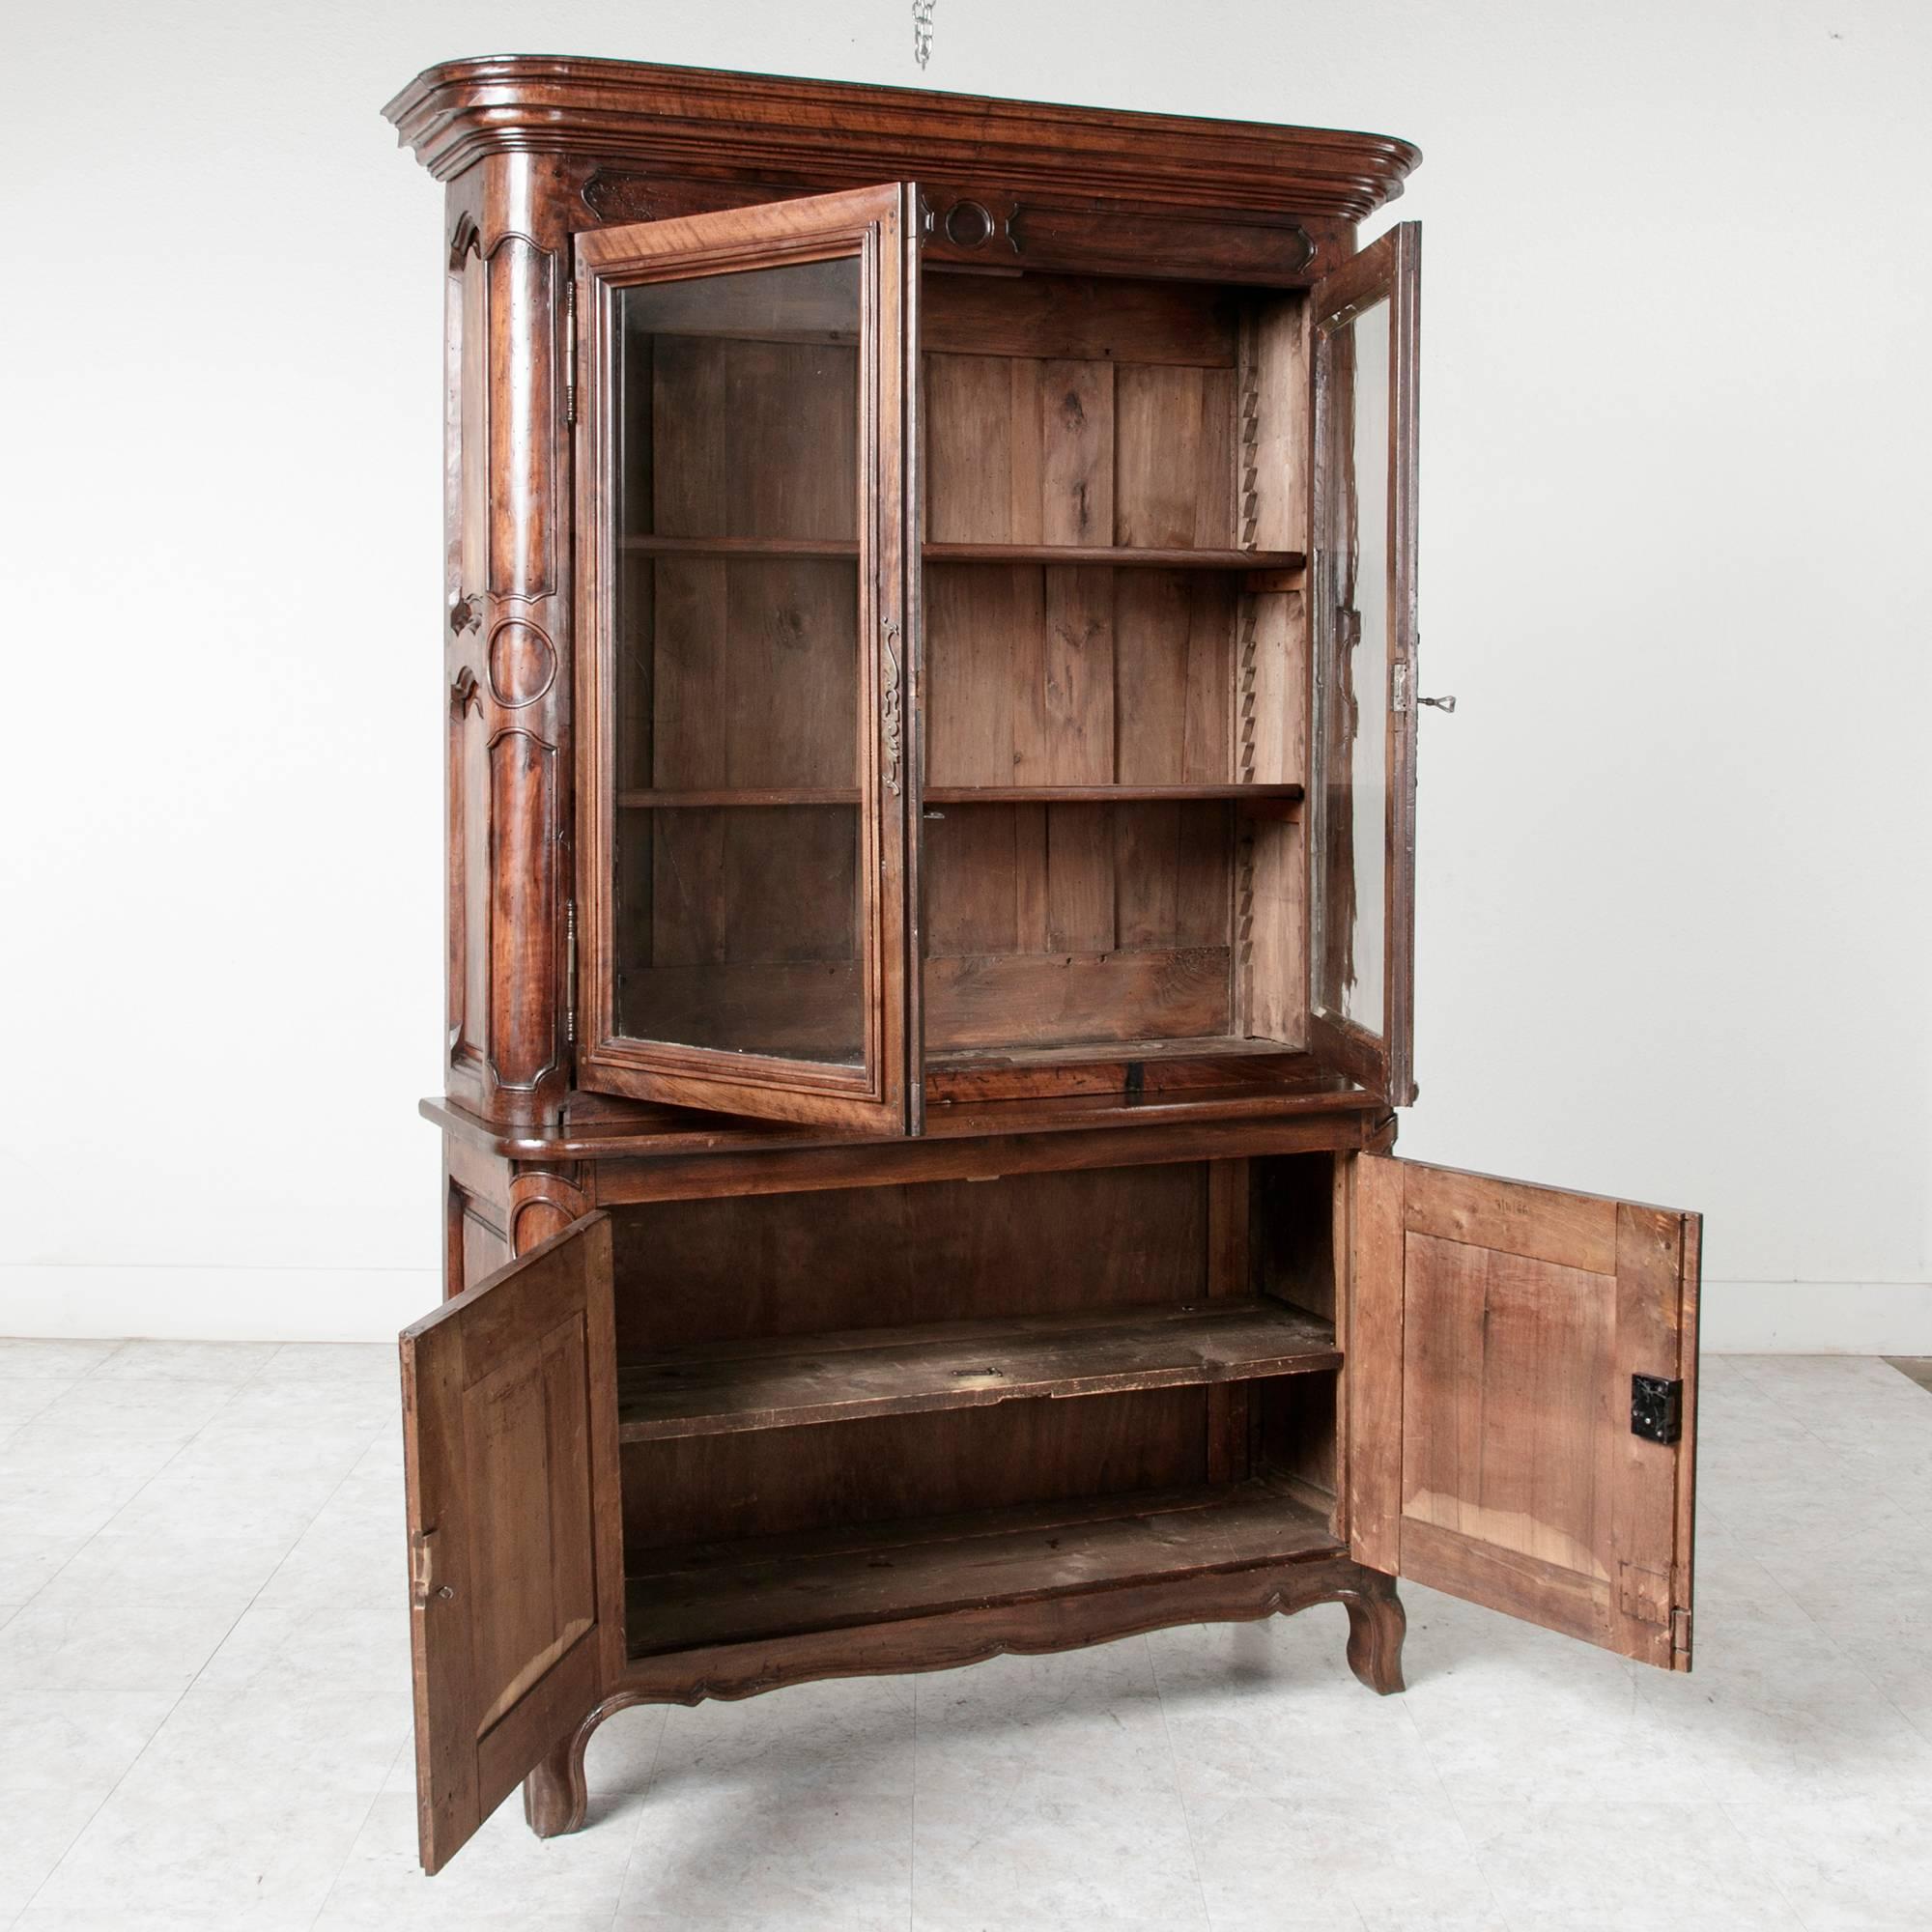 18th Century and Earlier 18th Century French Hand-Carved Walnut Bibliotheque Bookcase, HandBlown Glass